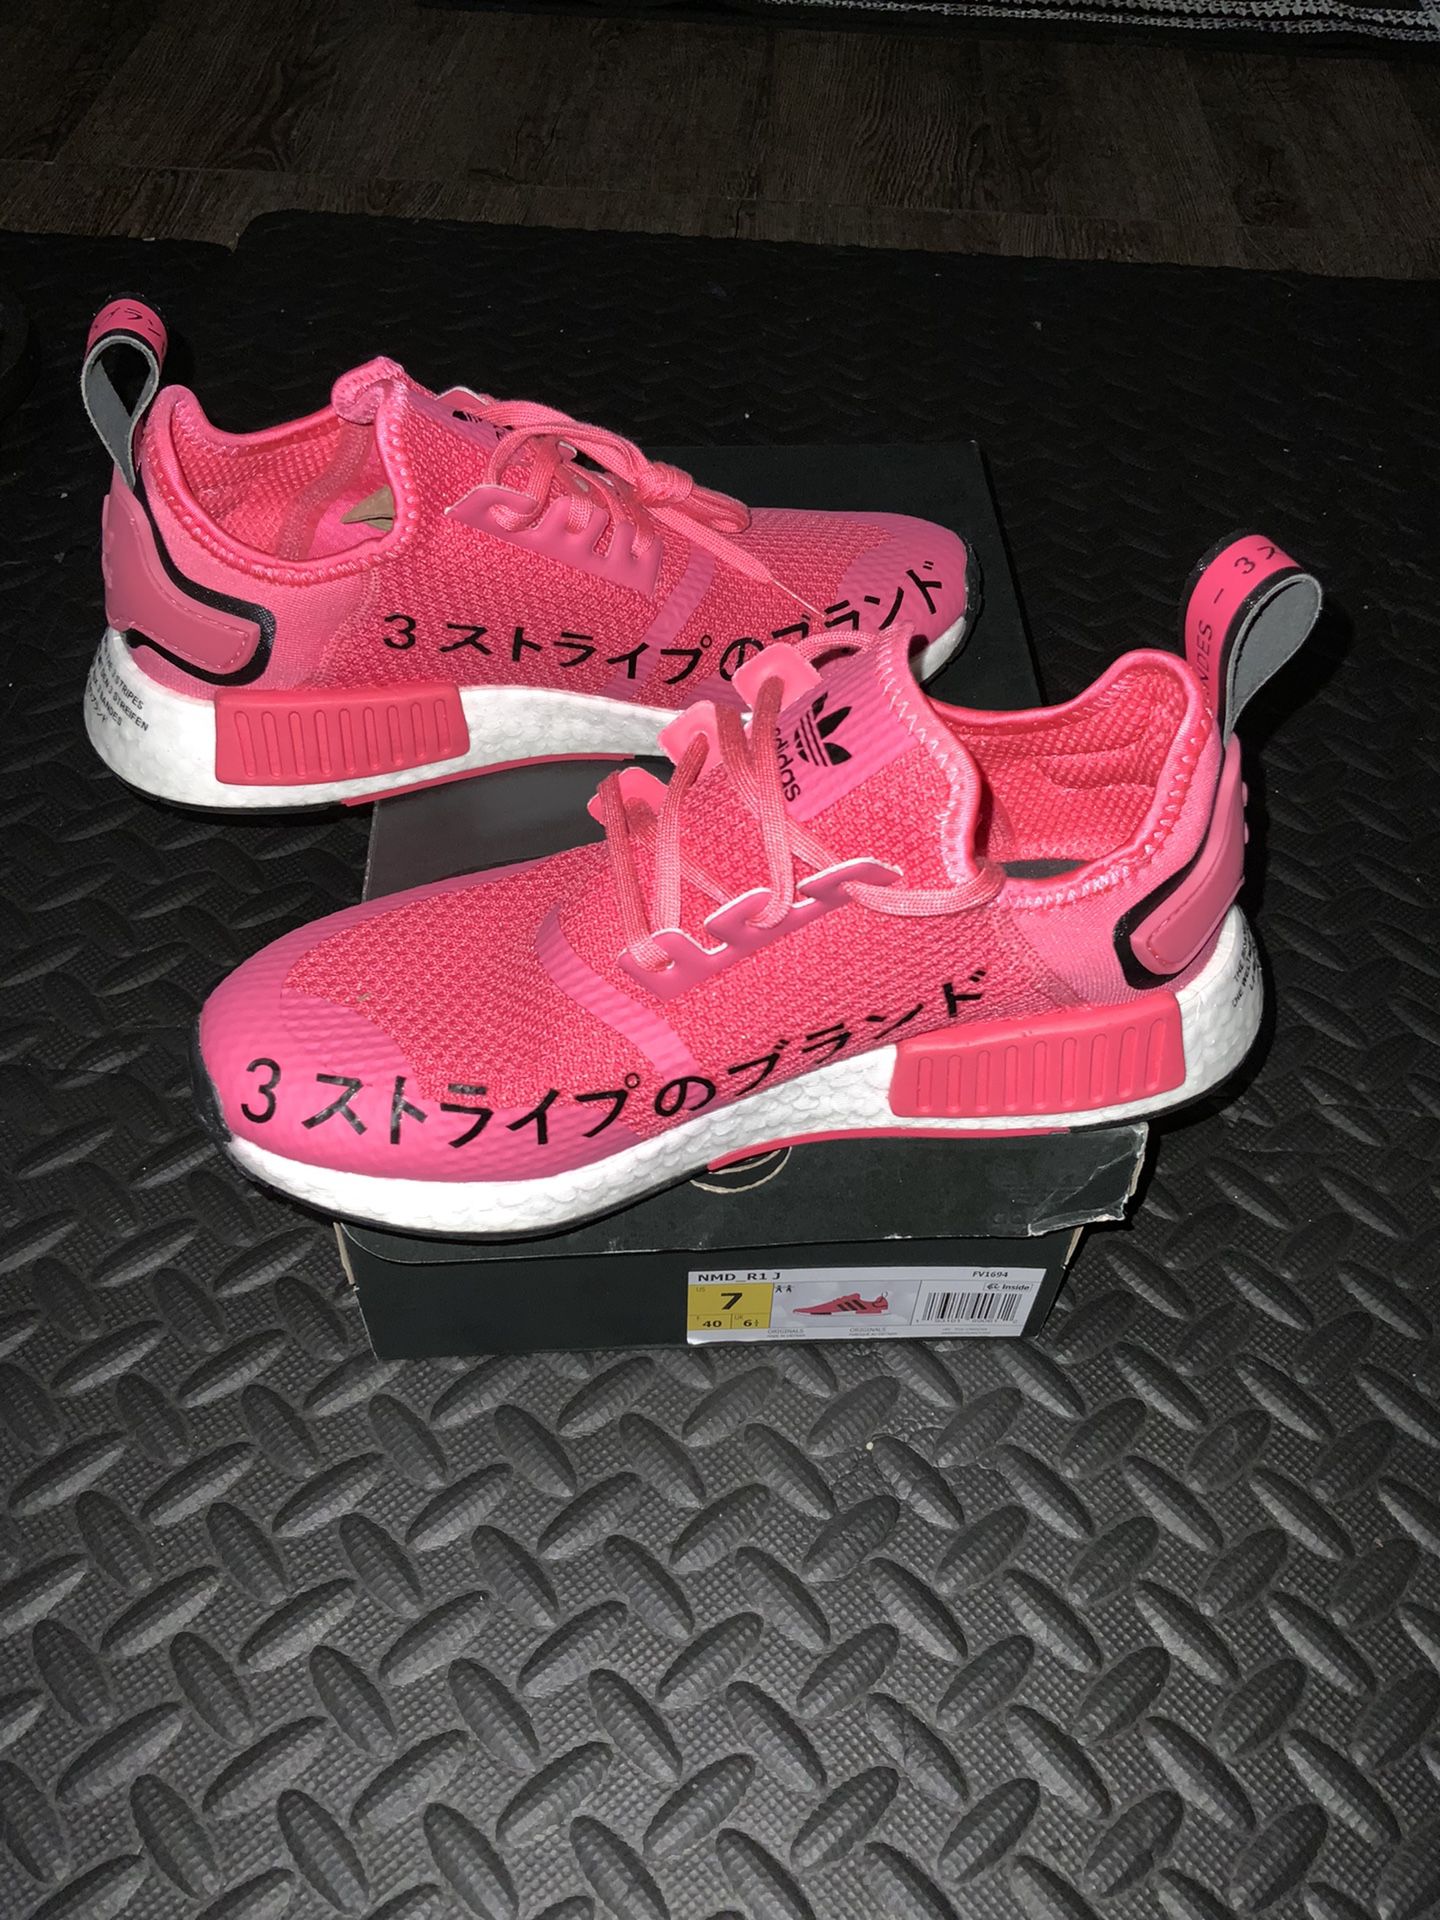 Adidas NMD_R1 sneakers.  Youth 7 / women’s 8